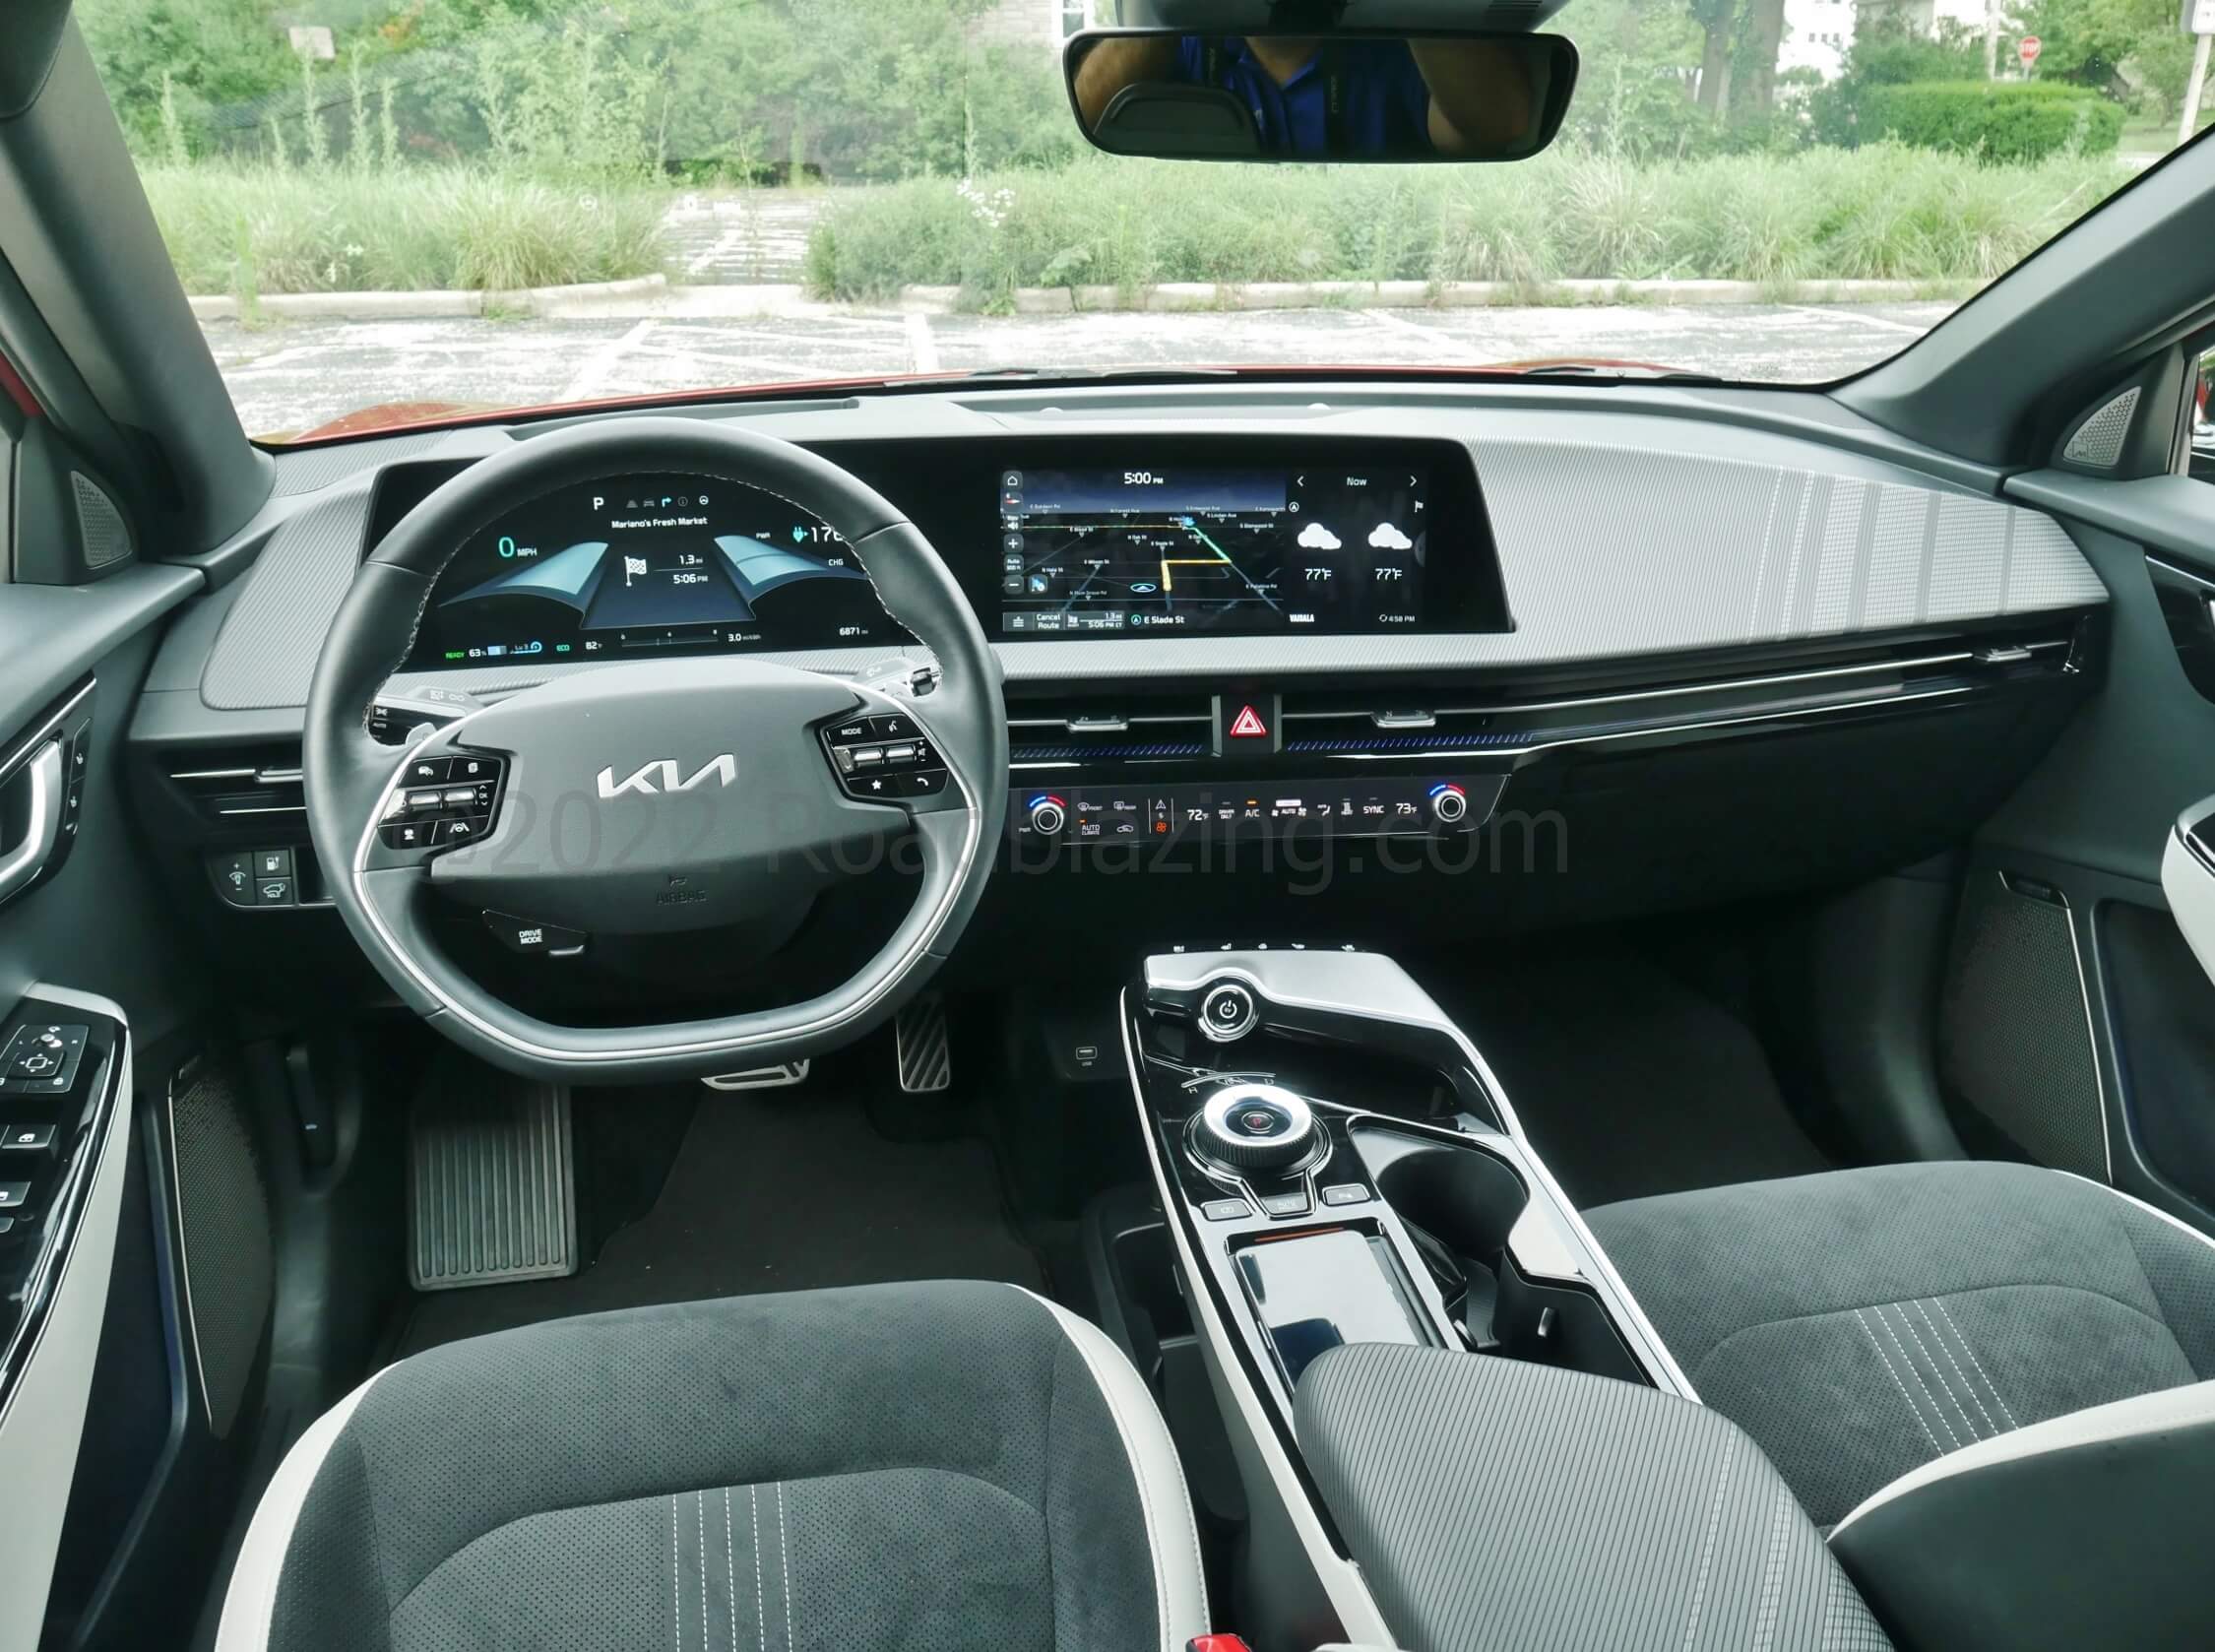 2022 Kia EV6 GT-Line AWD: Dual 12.3" instrument cluster & infotainment screens dominate business casual cabin environment